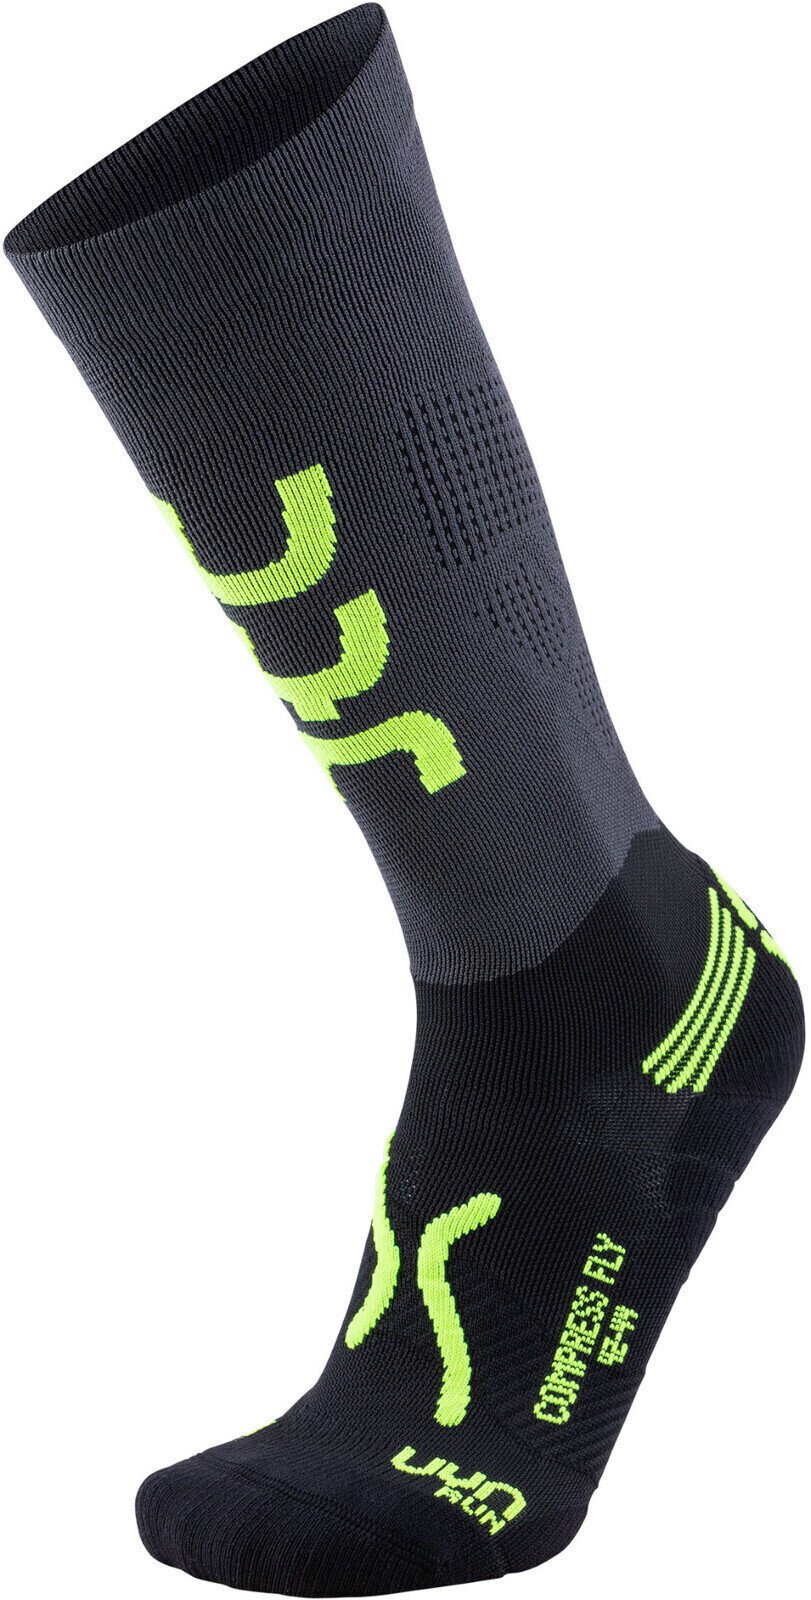 Chaussettes de course
 UYN Run Compression Fly Anthracite-Yellow Fluo 39/41 Chaussettes de course